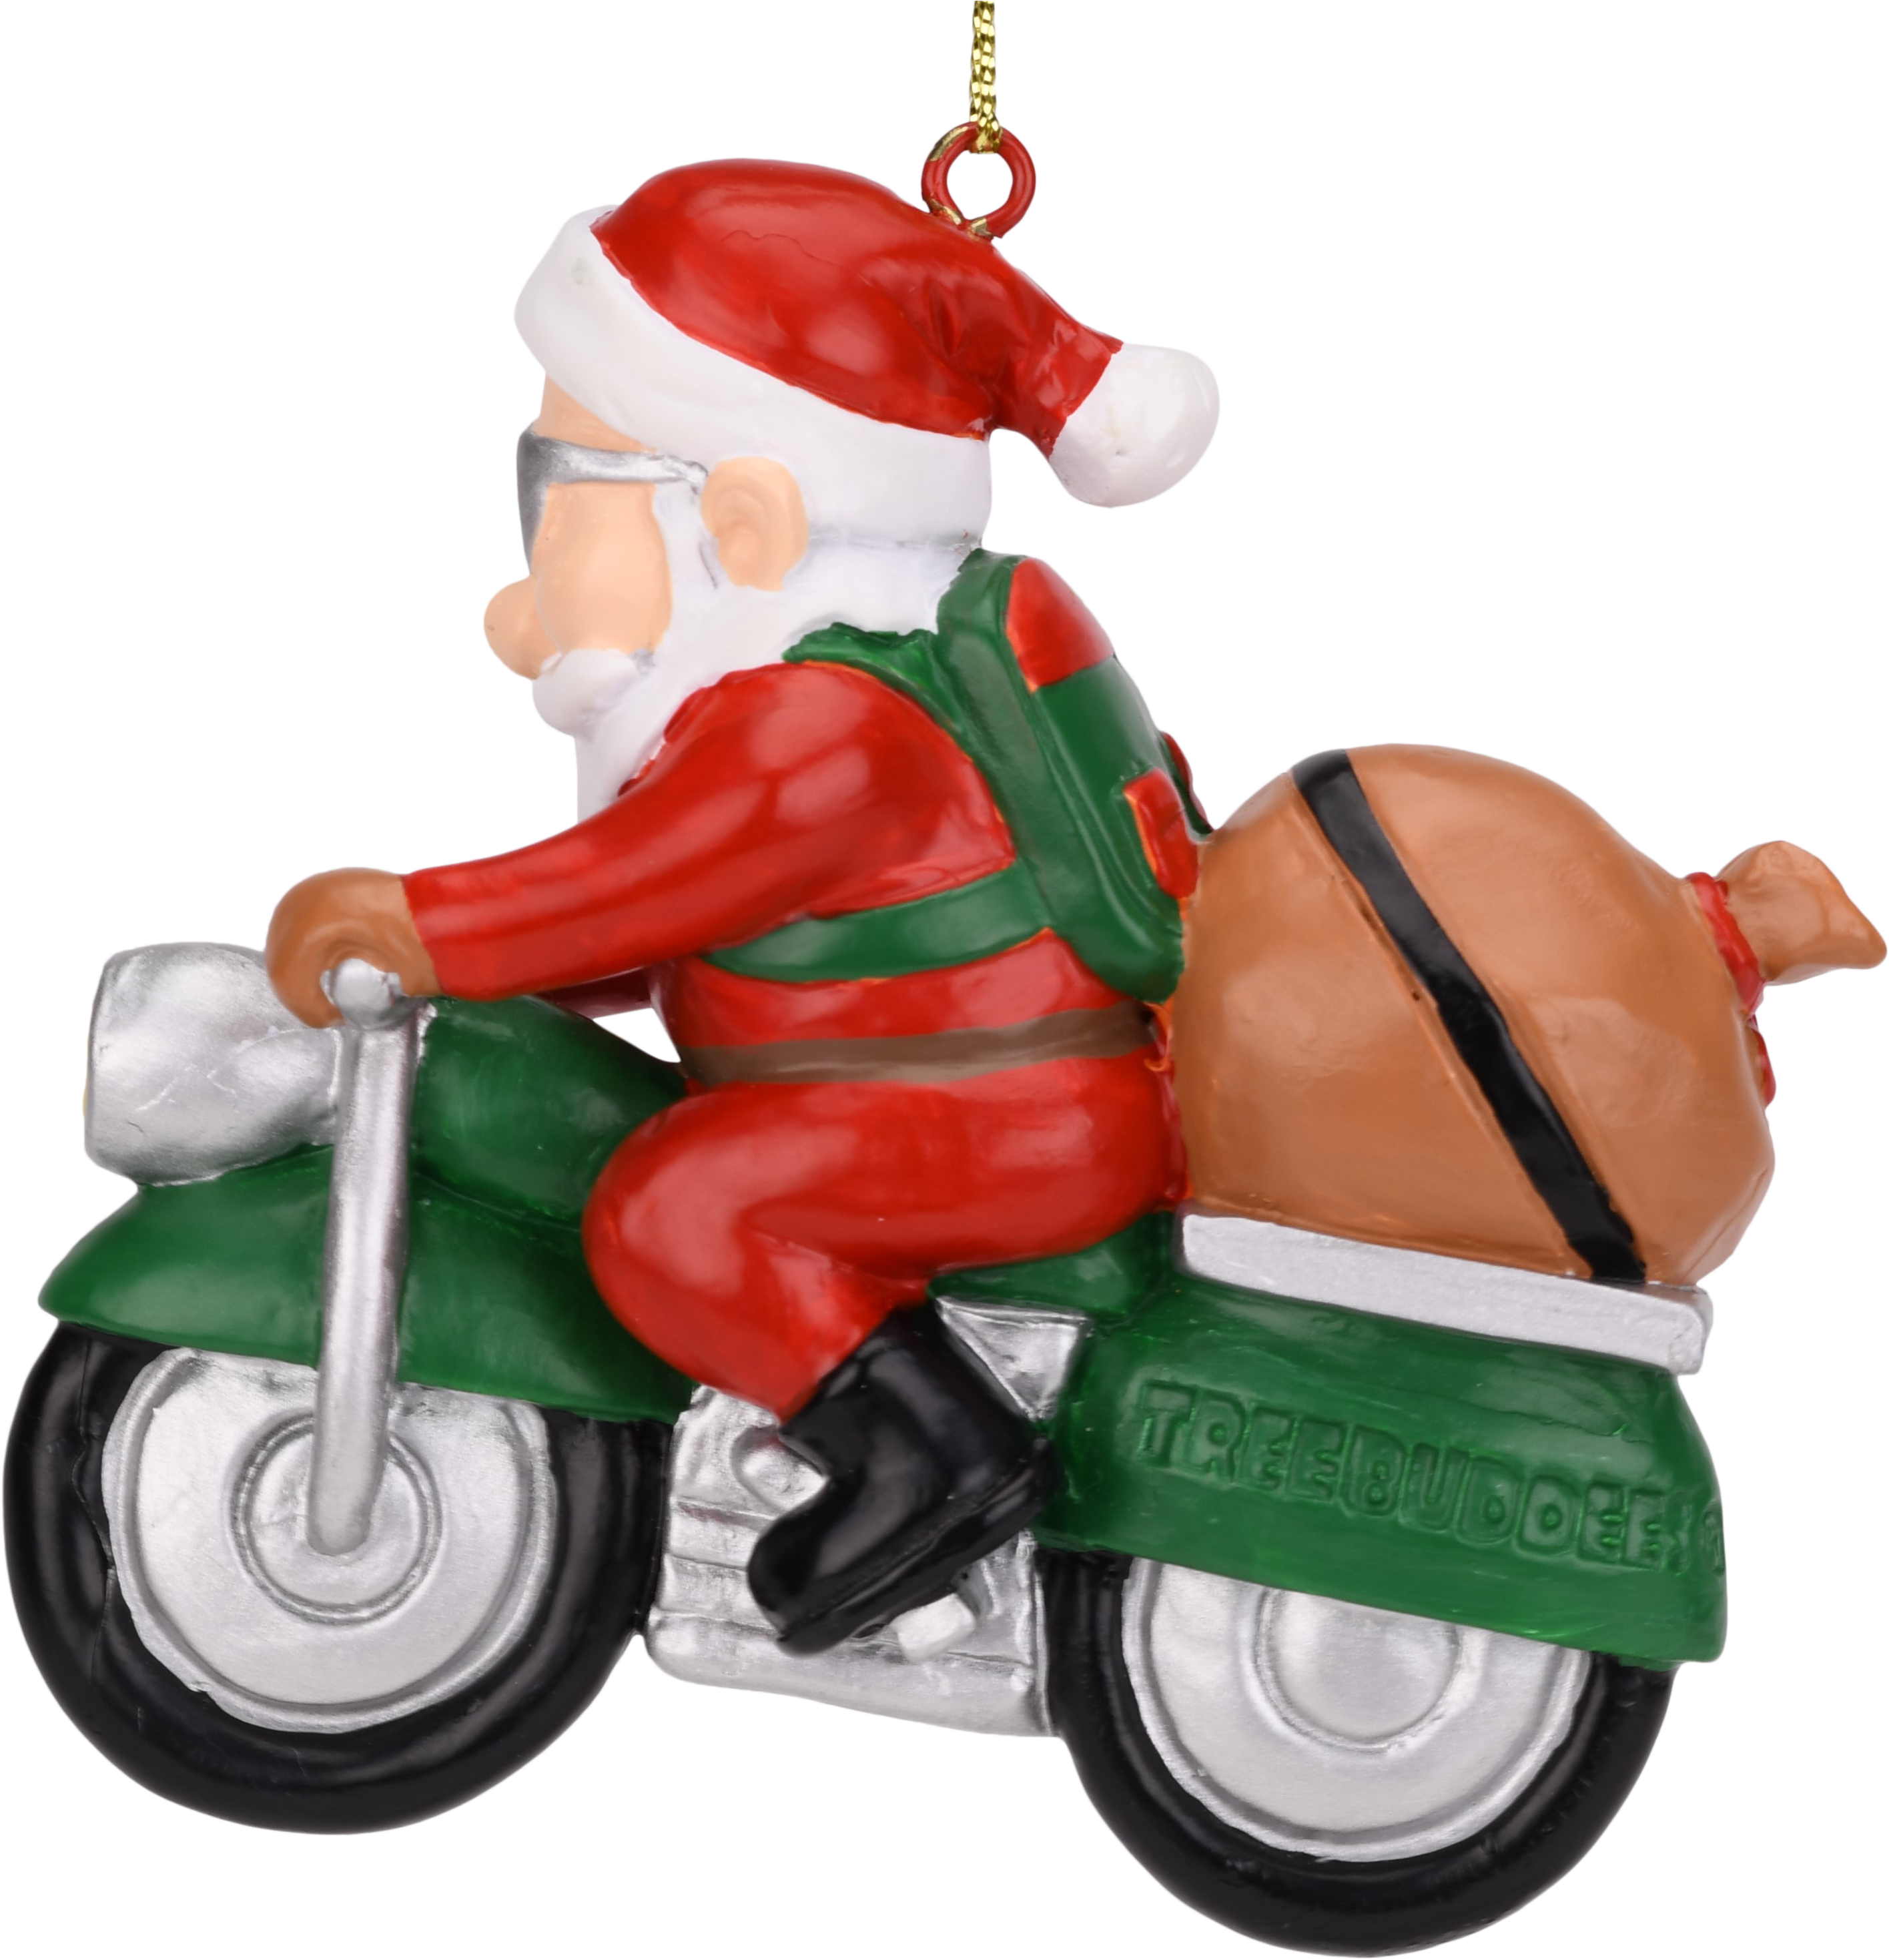 A Christmas Ornament On A Motorcycle